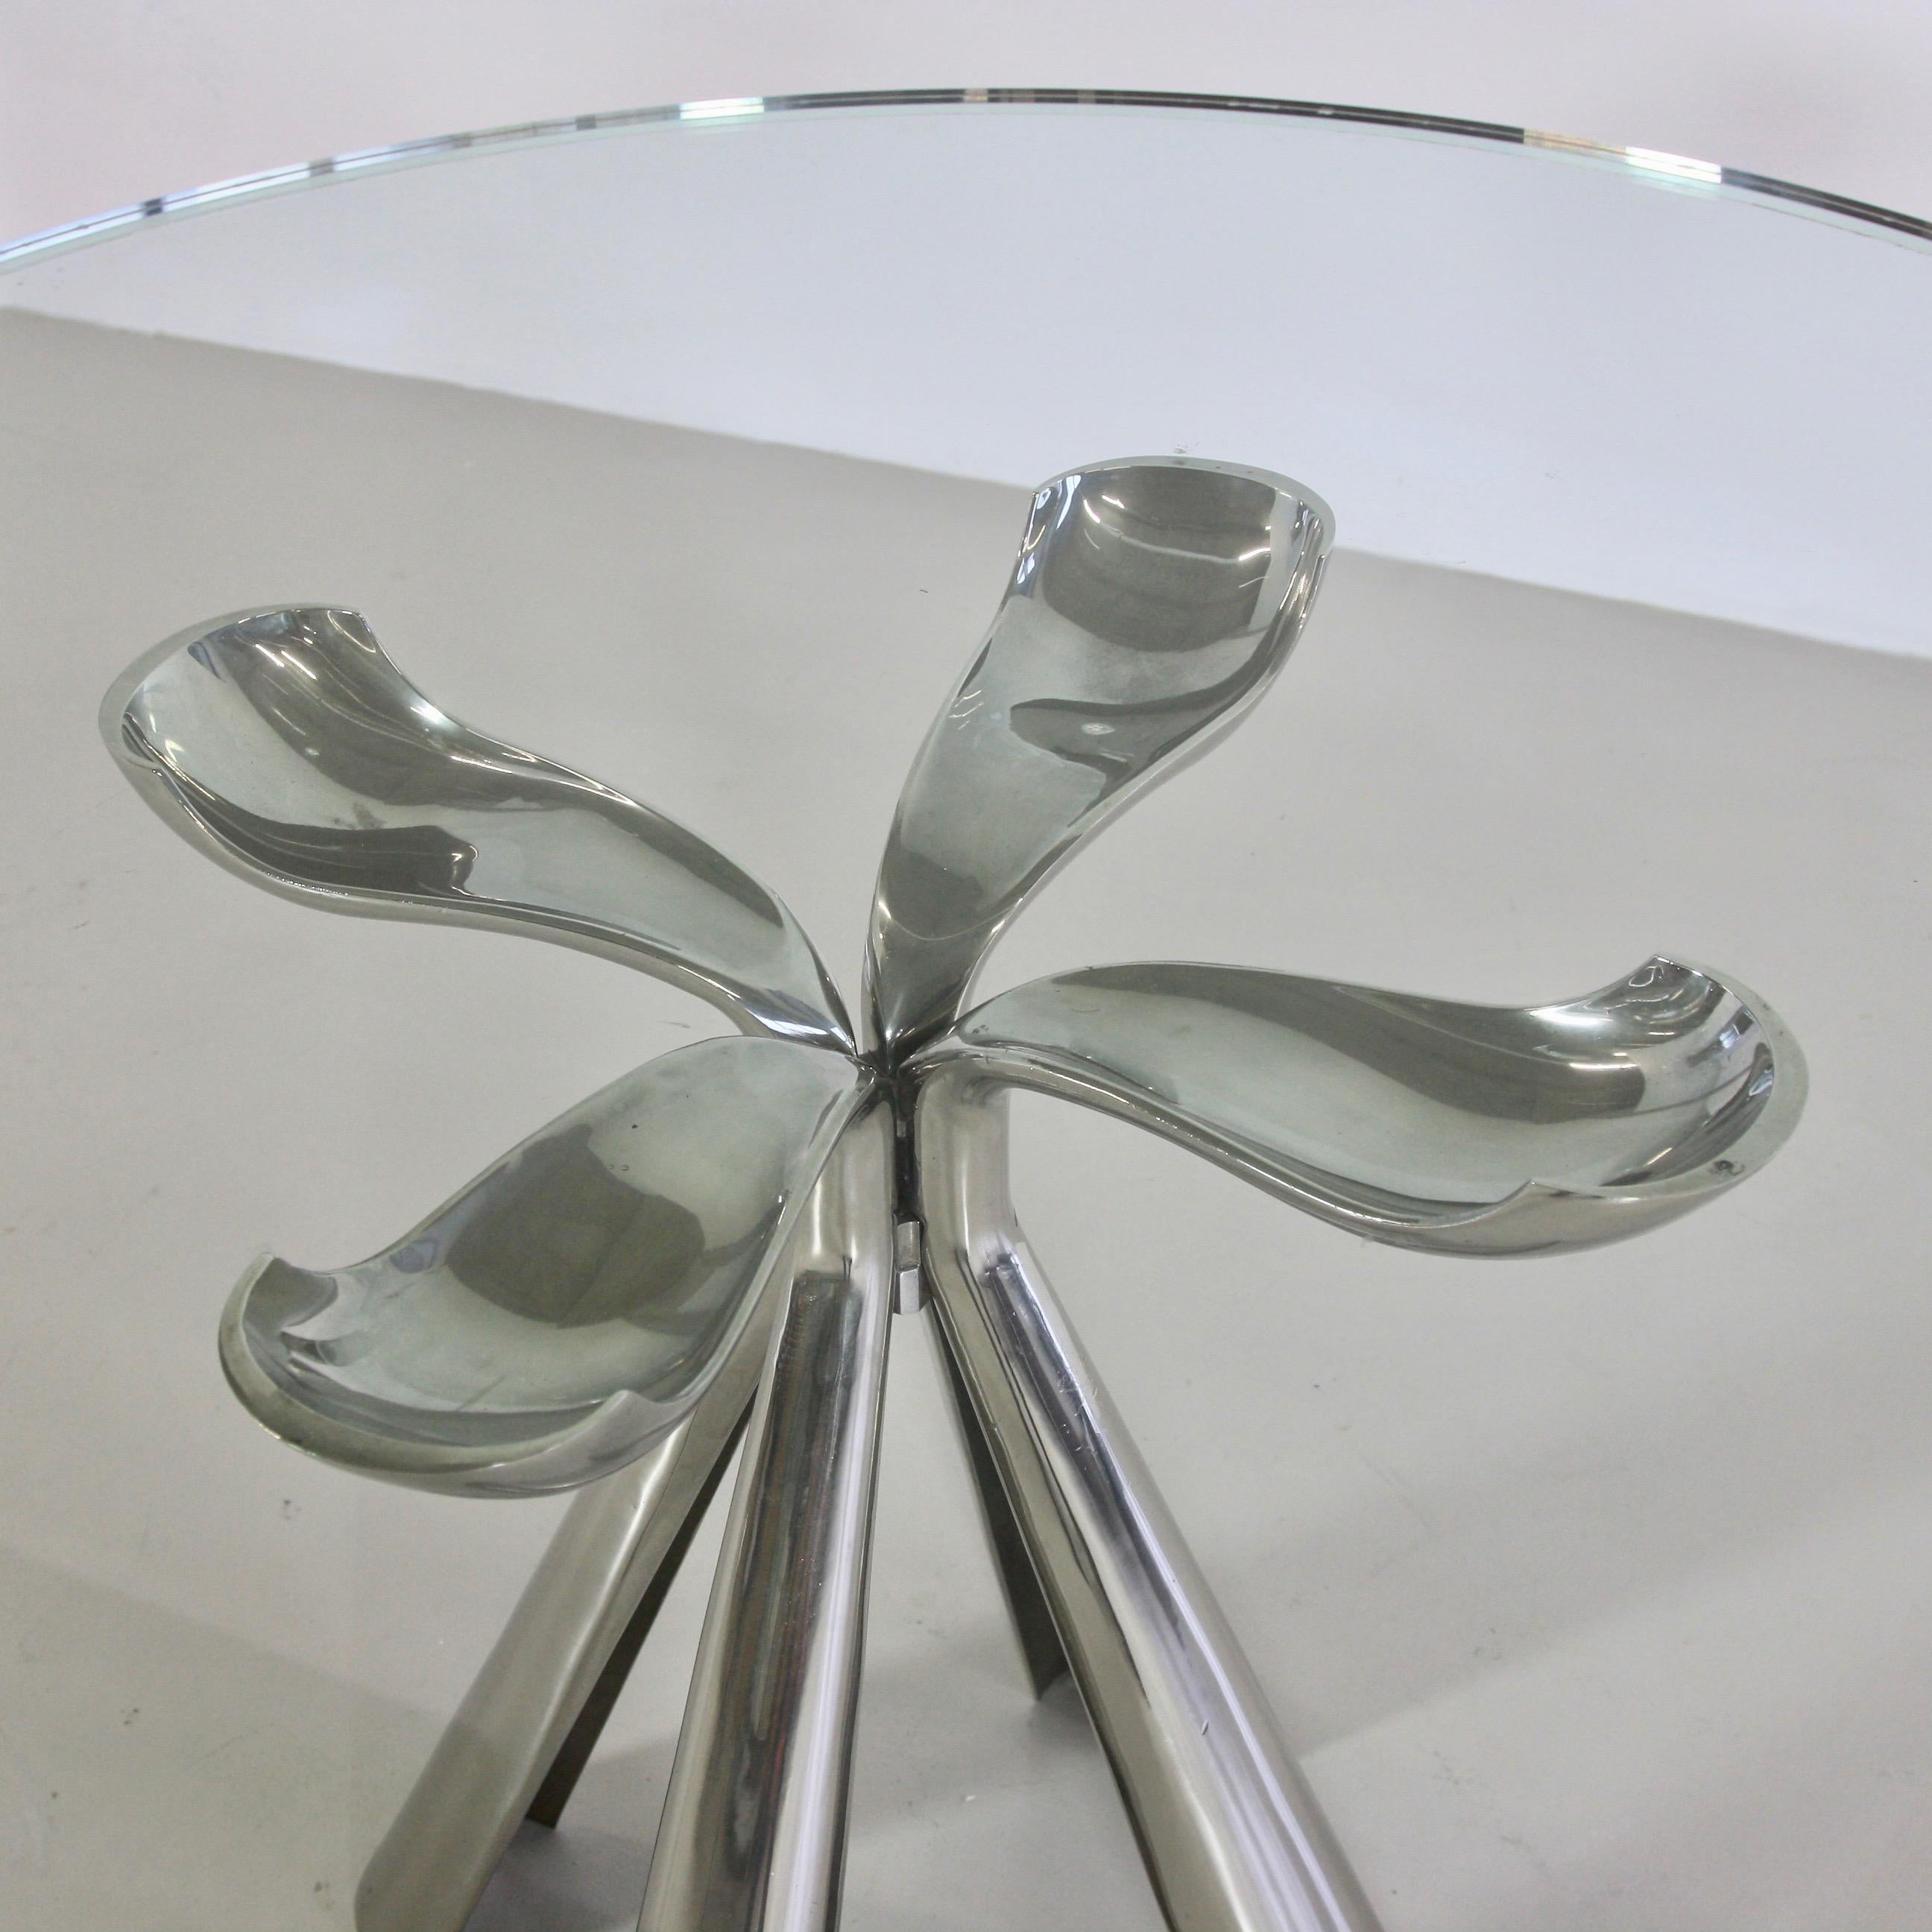 Dining table designed by Vittorio Introini. Italy, Saporiti, 1972.

Cast aluminum base in the shape of a petal with the rare original round glass top including mirrored rim. Model COLBY.
Condition: 

Excellent vintage condition. Original glass